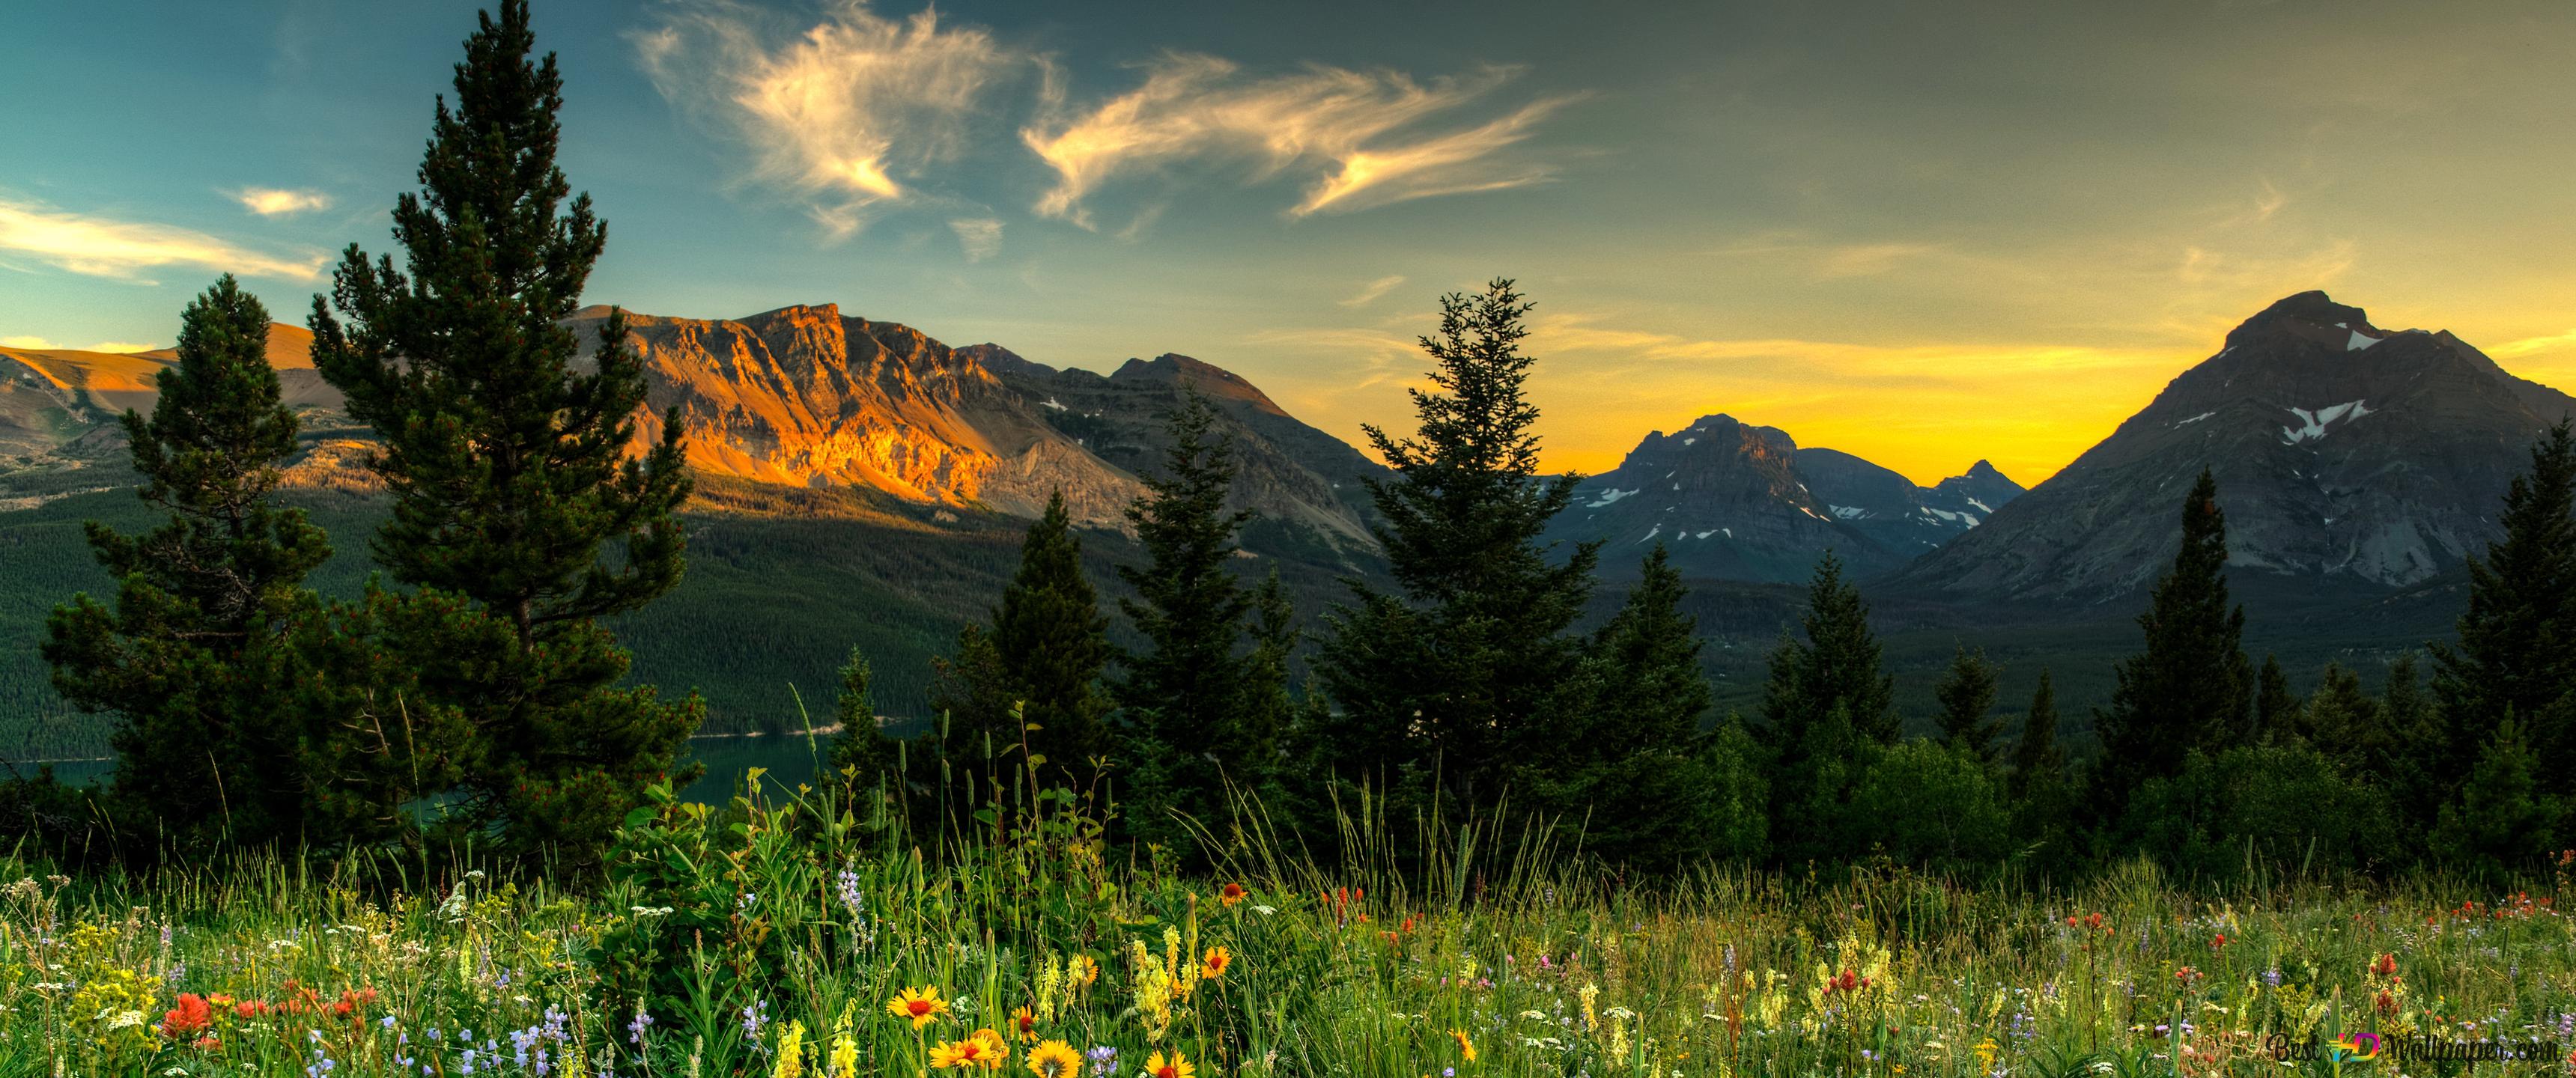 Springtime in the Mountains 6K wallpaper download